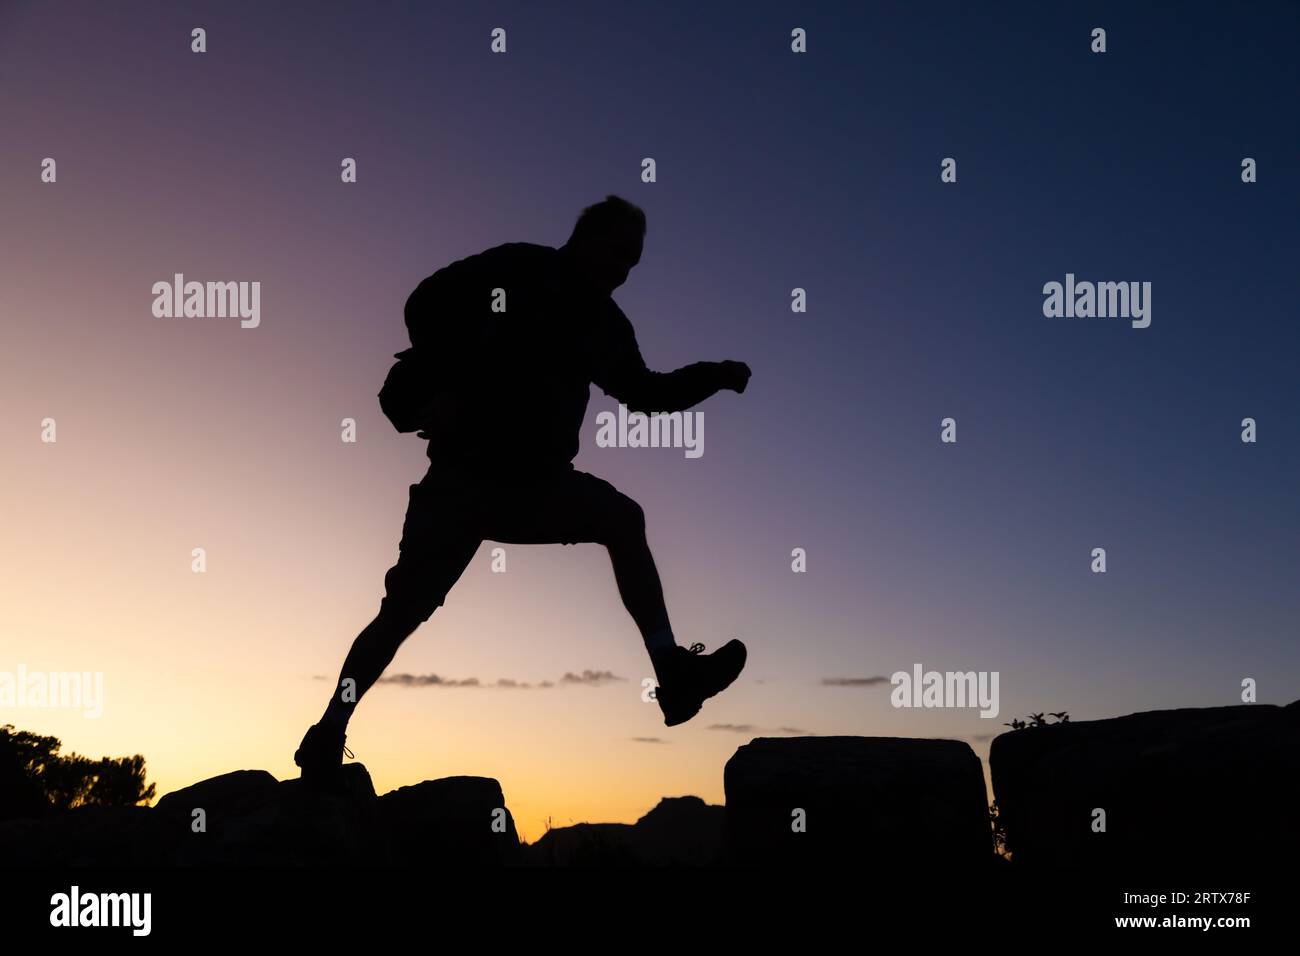 Senior citizen on a hike at sunrise in silhouette Stock Photo